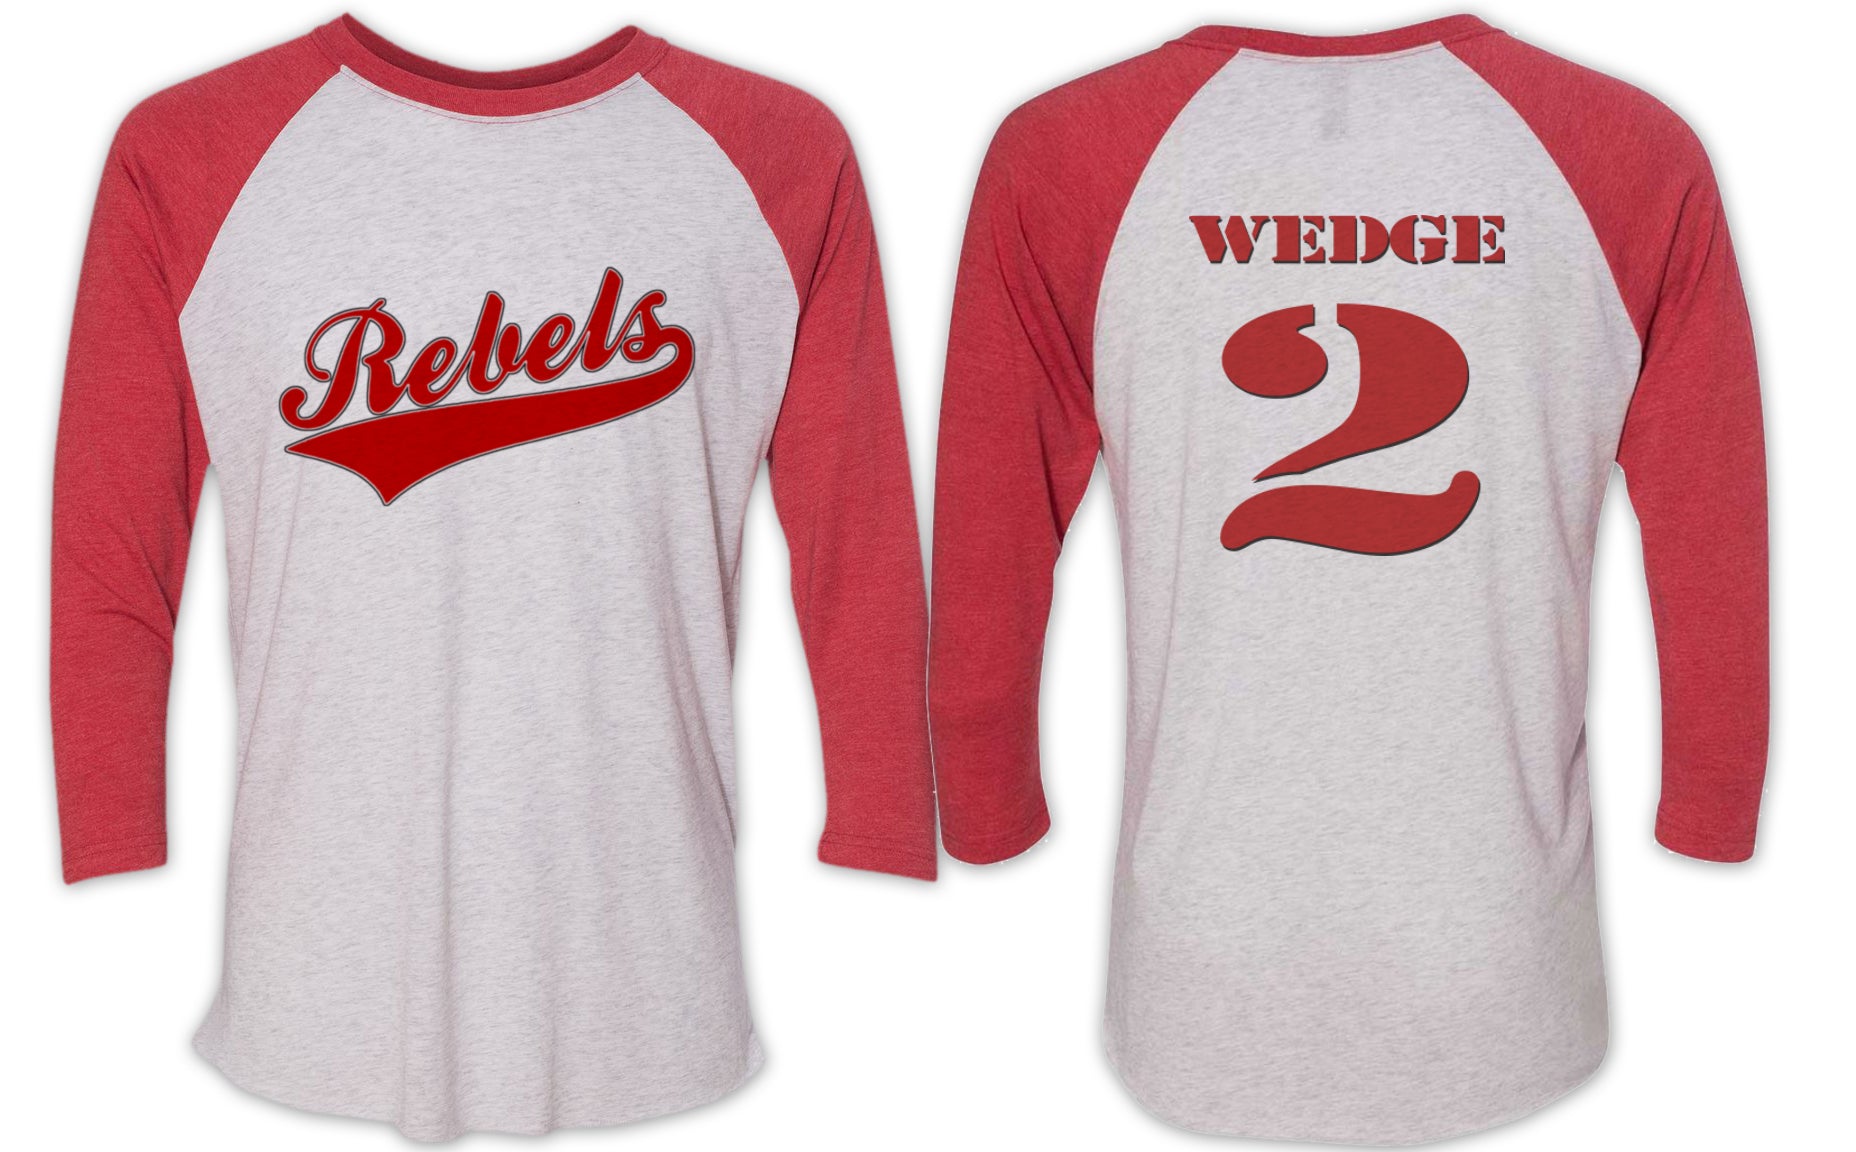 STAR WARS Wedge (Red Two) Rebels - Jersey